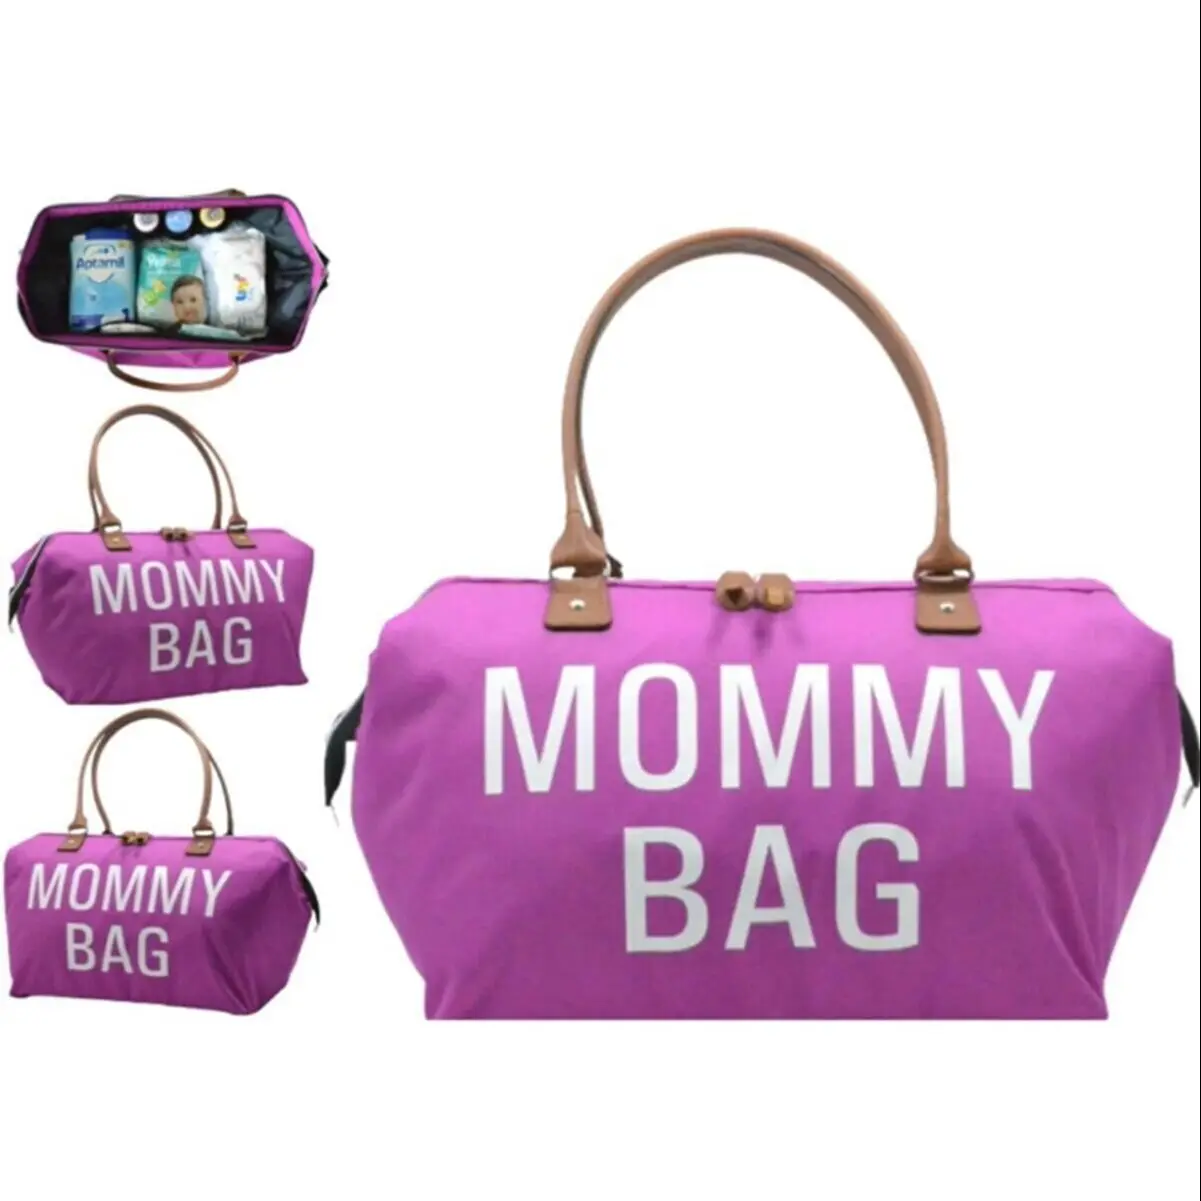 2022 MOMMY BAG Baby Care Bag Hospital and Functional Babies Organizer Daily, Travel Bag with Waterproof Fabric Thermal CHQ